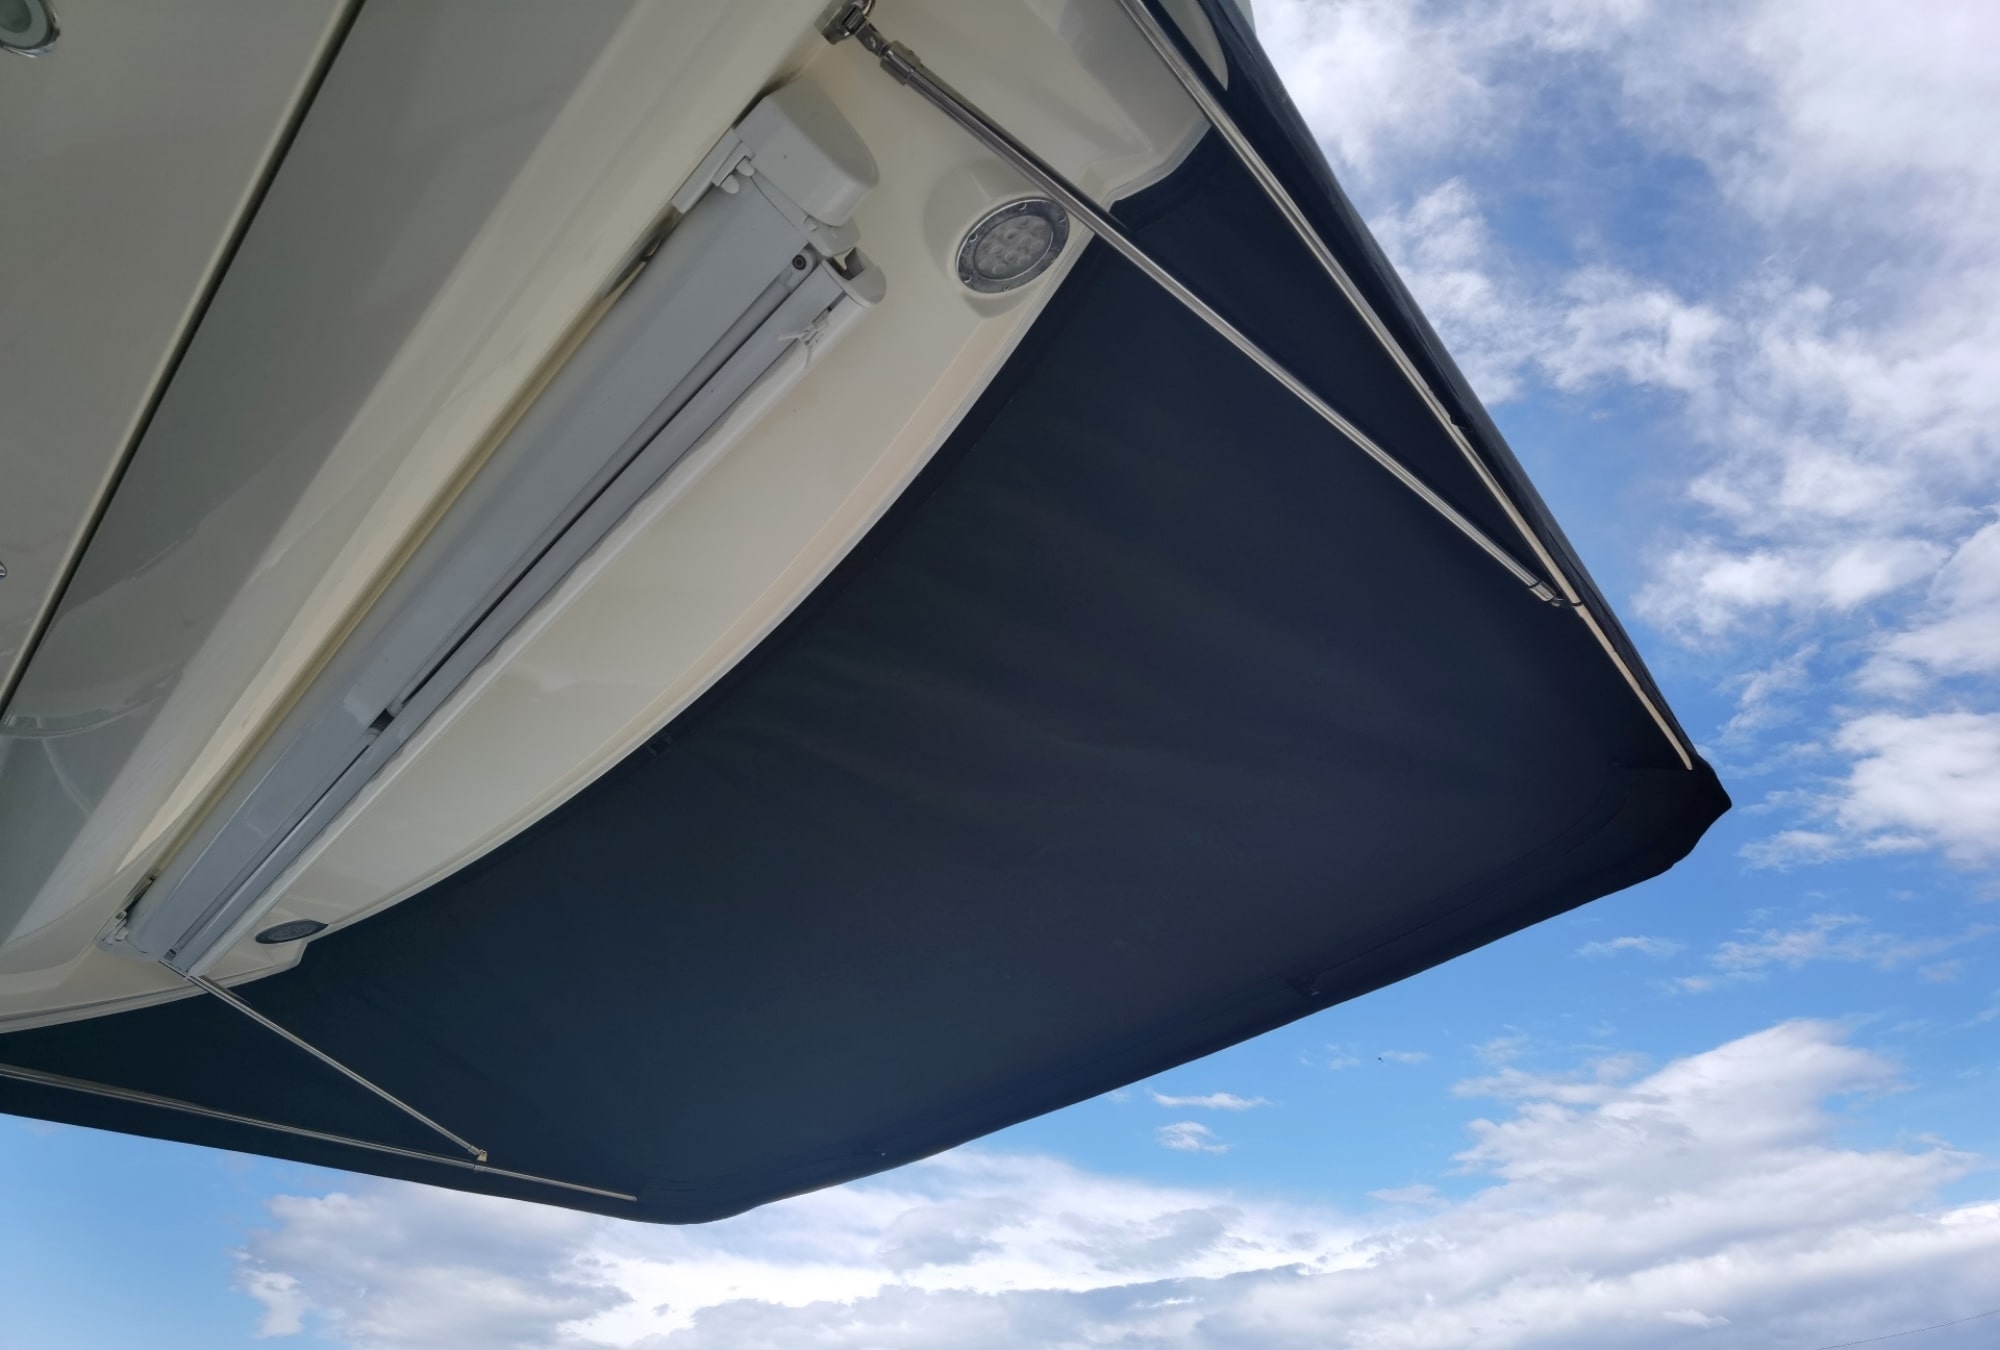 Sunbrella Plus marine fabric for cockpit awning on Prestige 460S. Durable fabric with properties for all weather conditions.